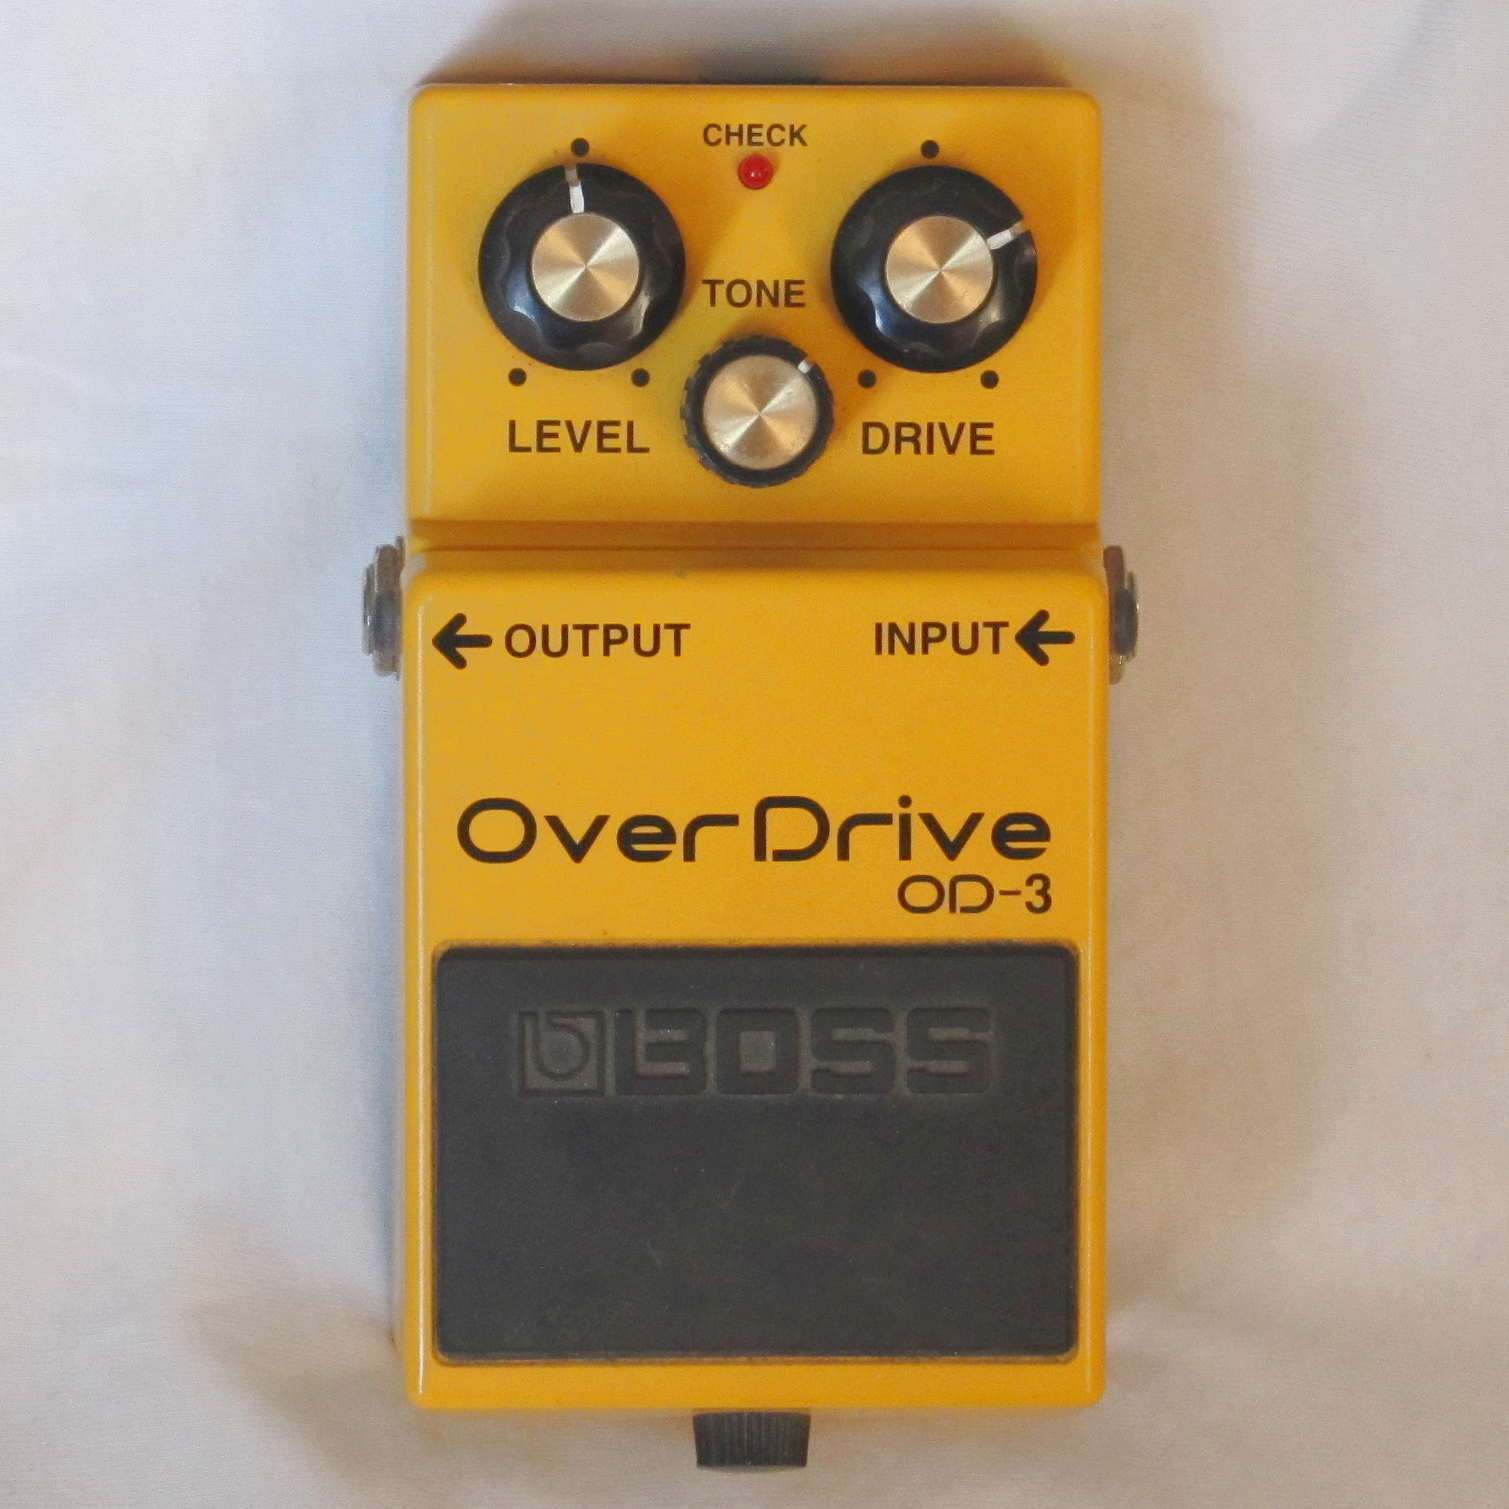 Boss OD-3 Overdrive Pedal - A short review and selected video demos